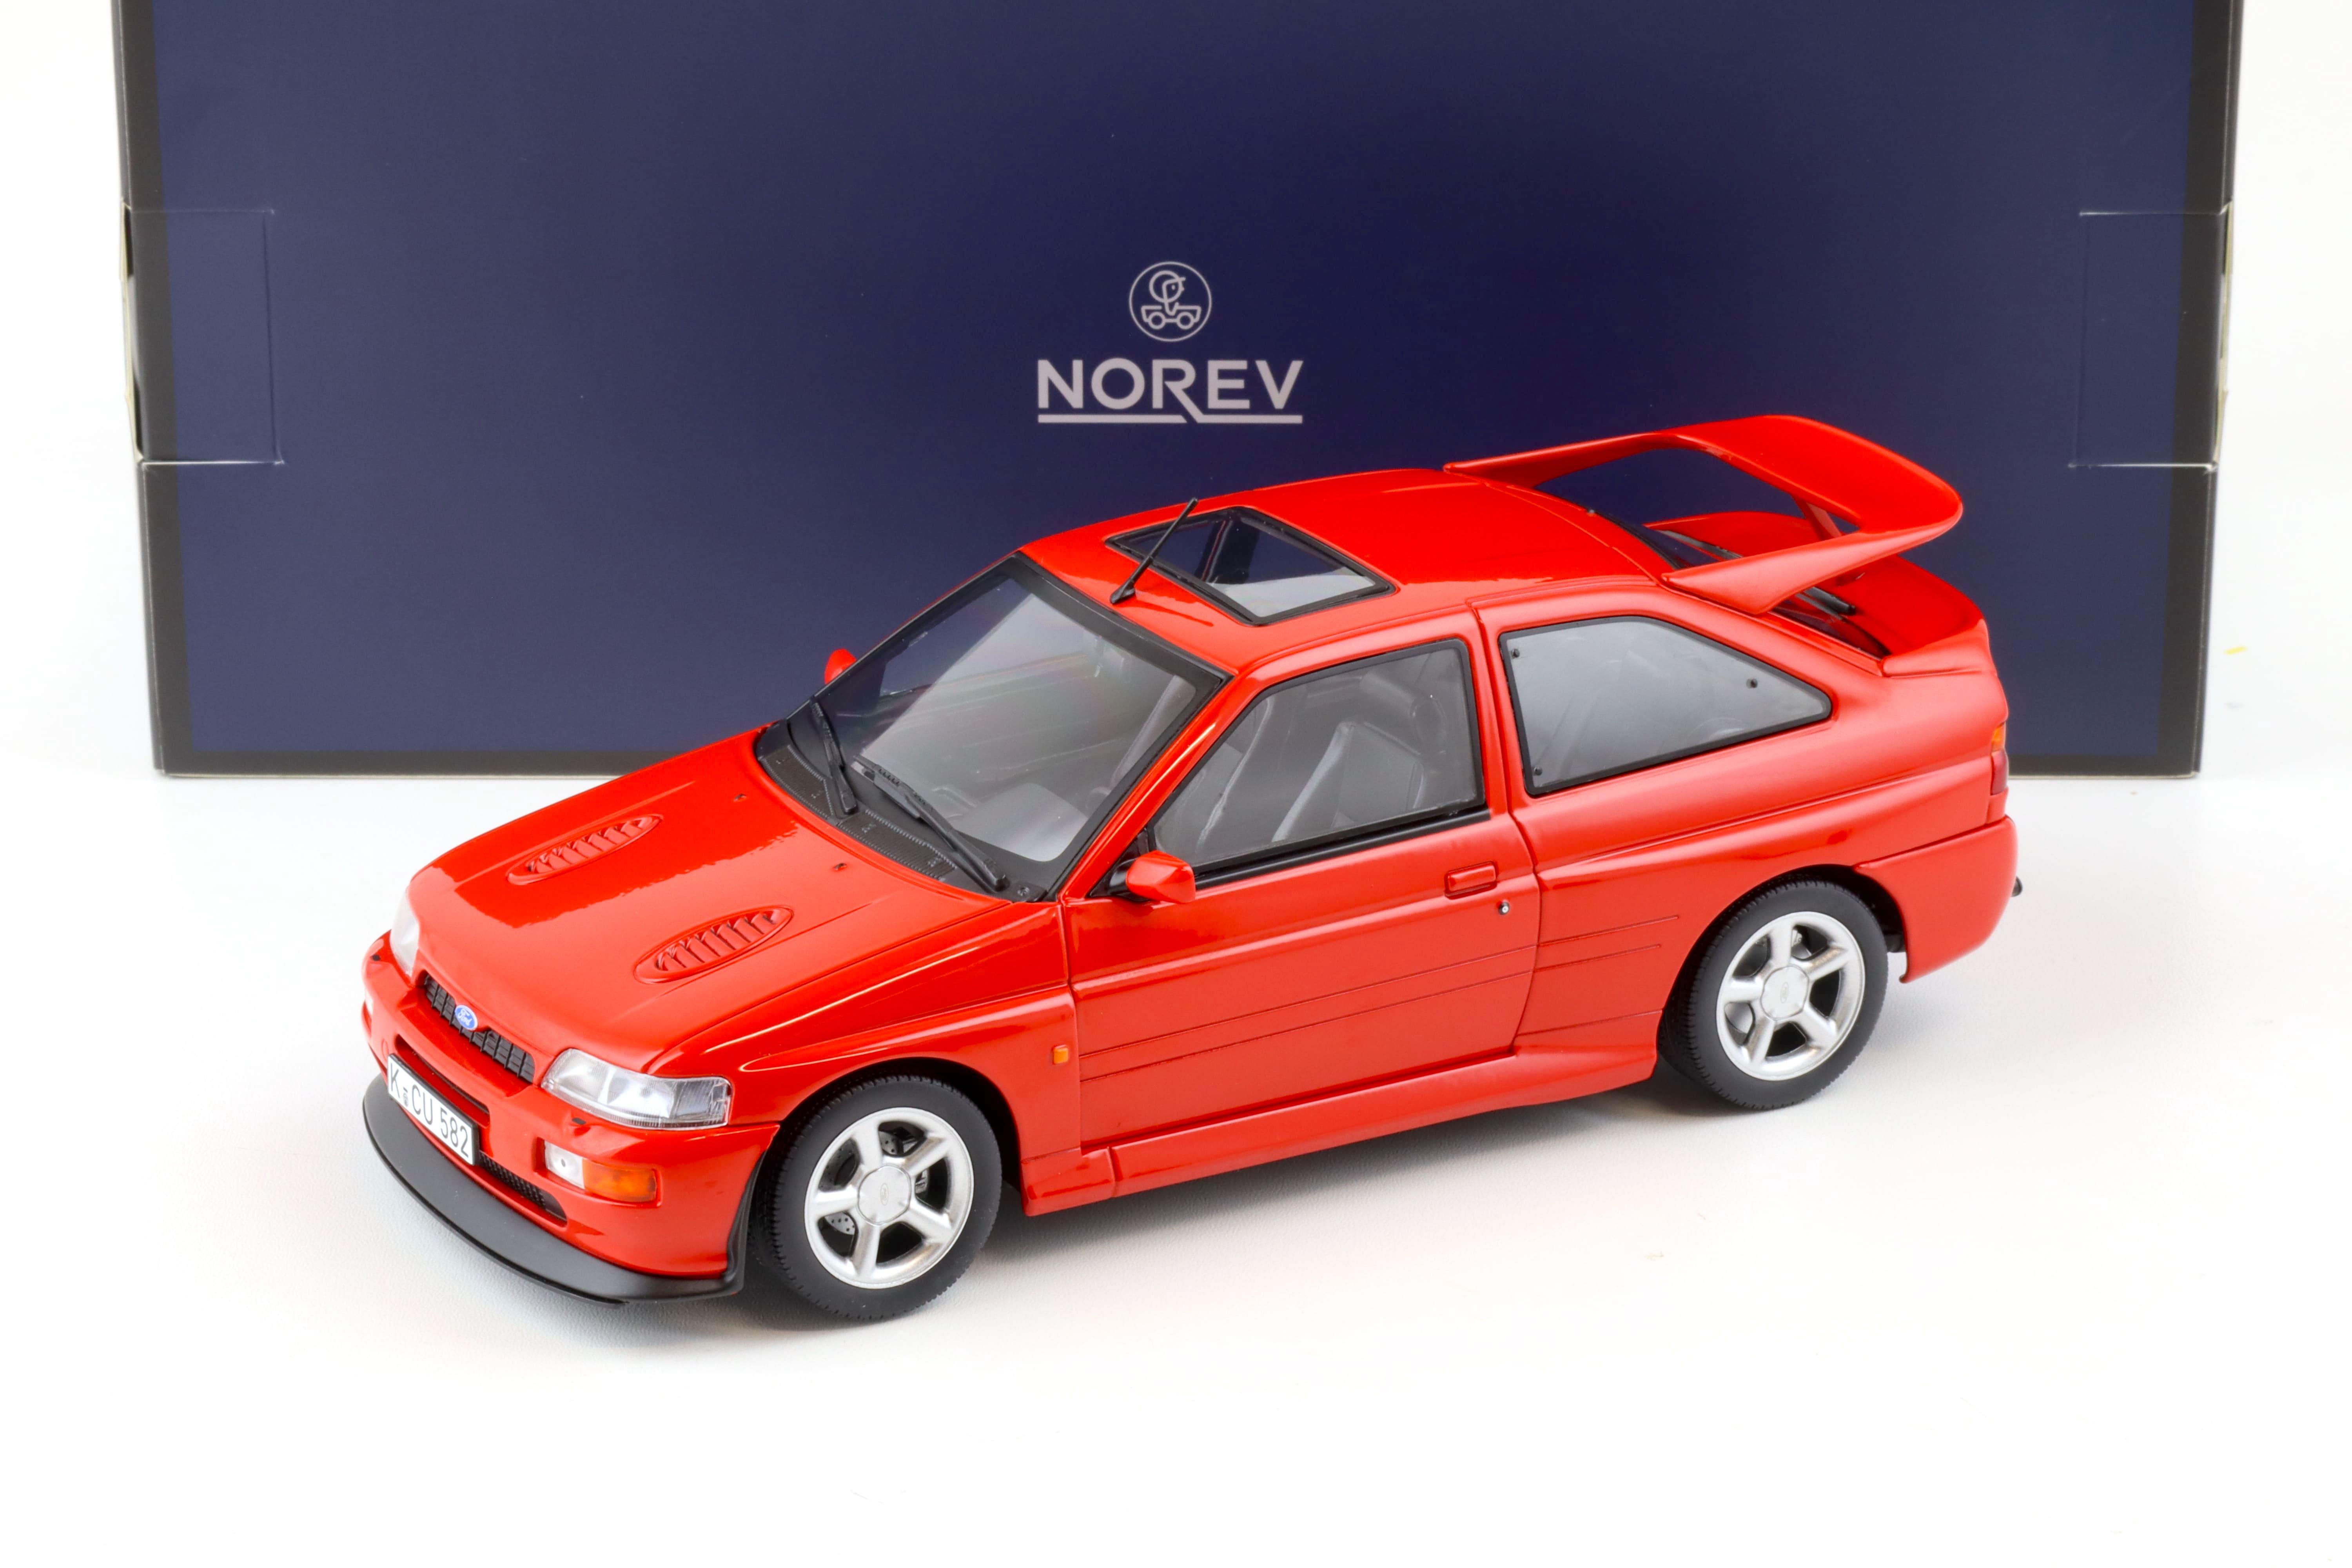 1:18 Norev Ford Escort Cosworth 1992 red - Limited 200 pcs.